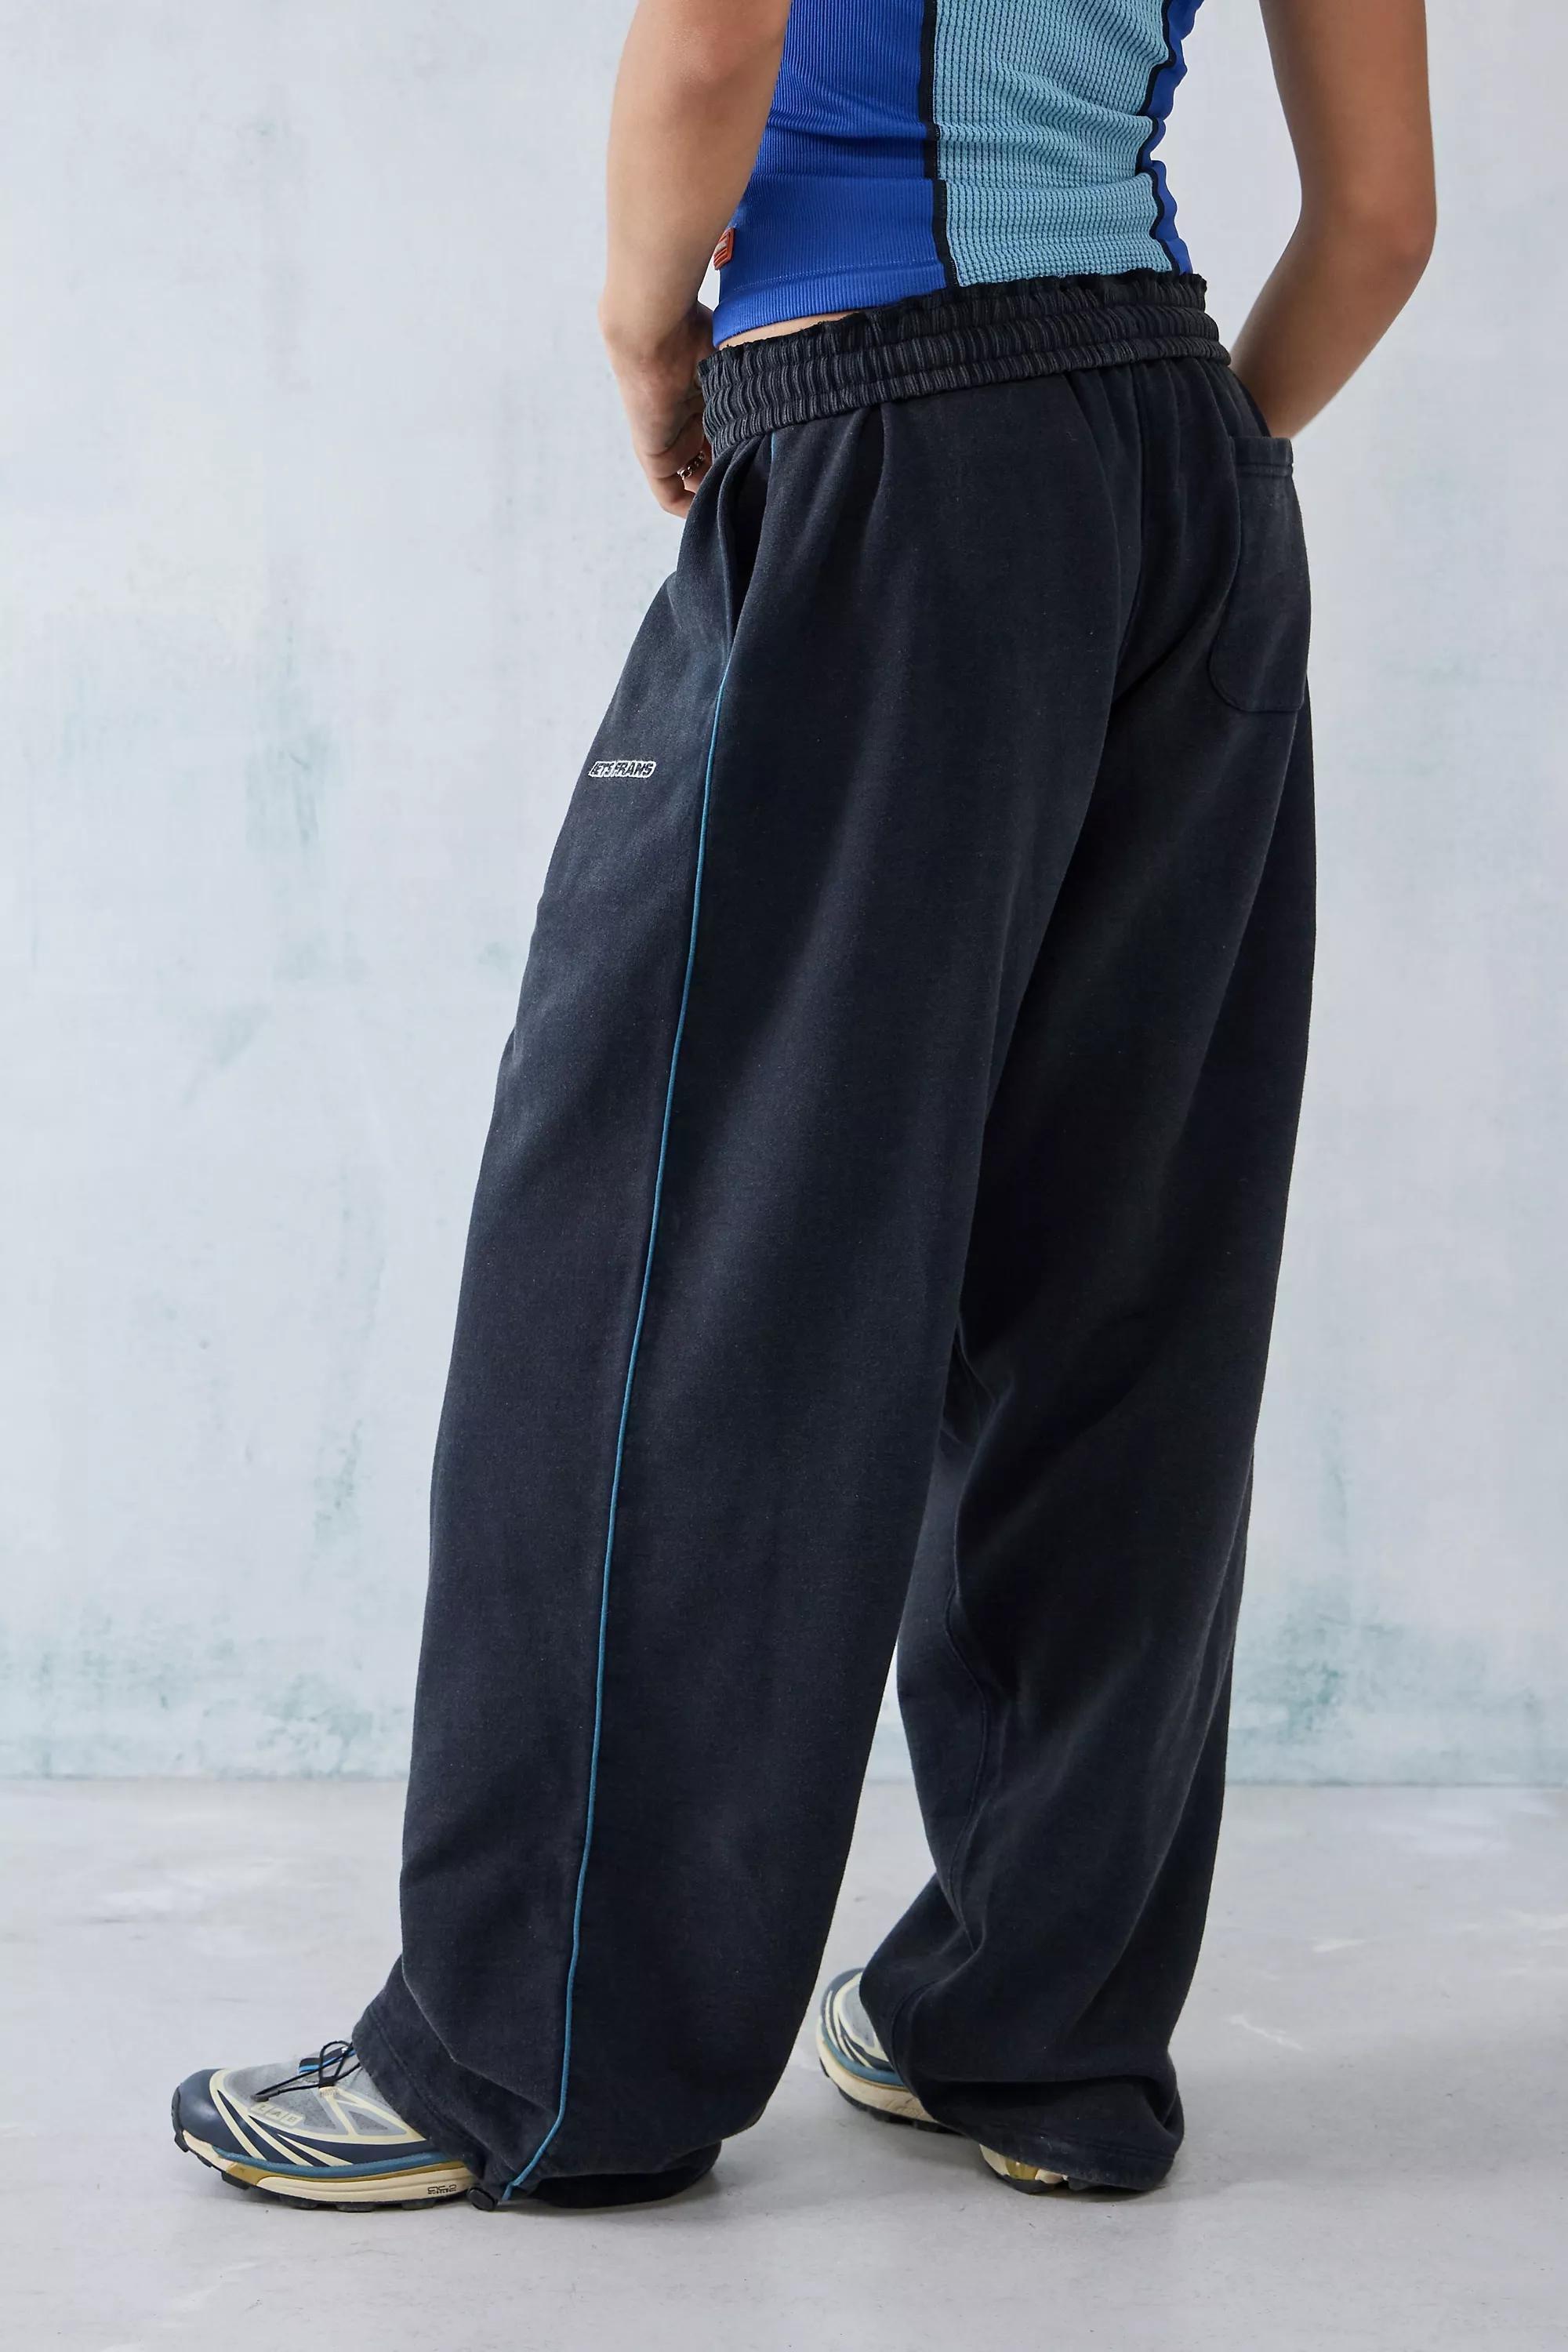 Urban Outfitters Black Iets Frans Harri Baggy Joggers